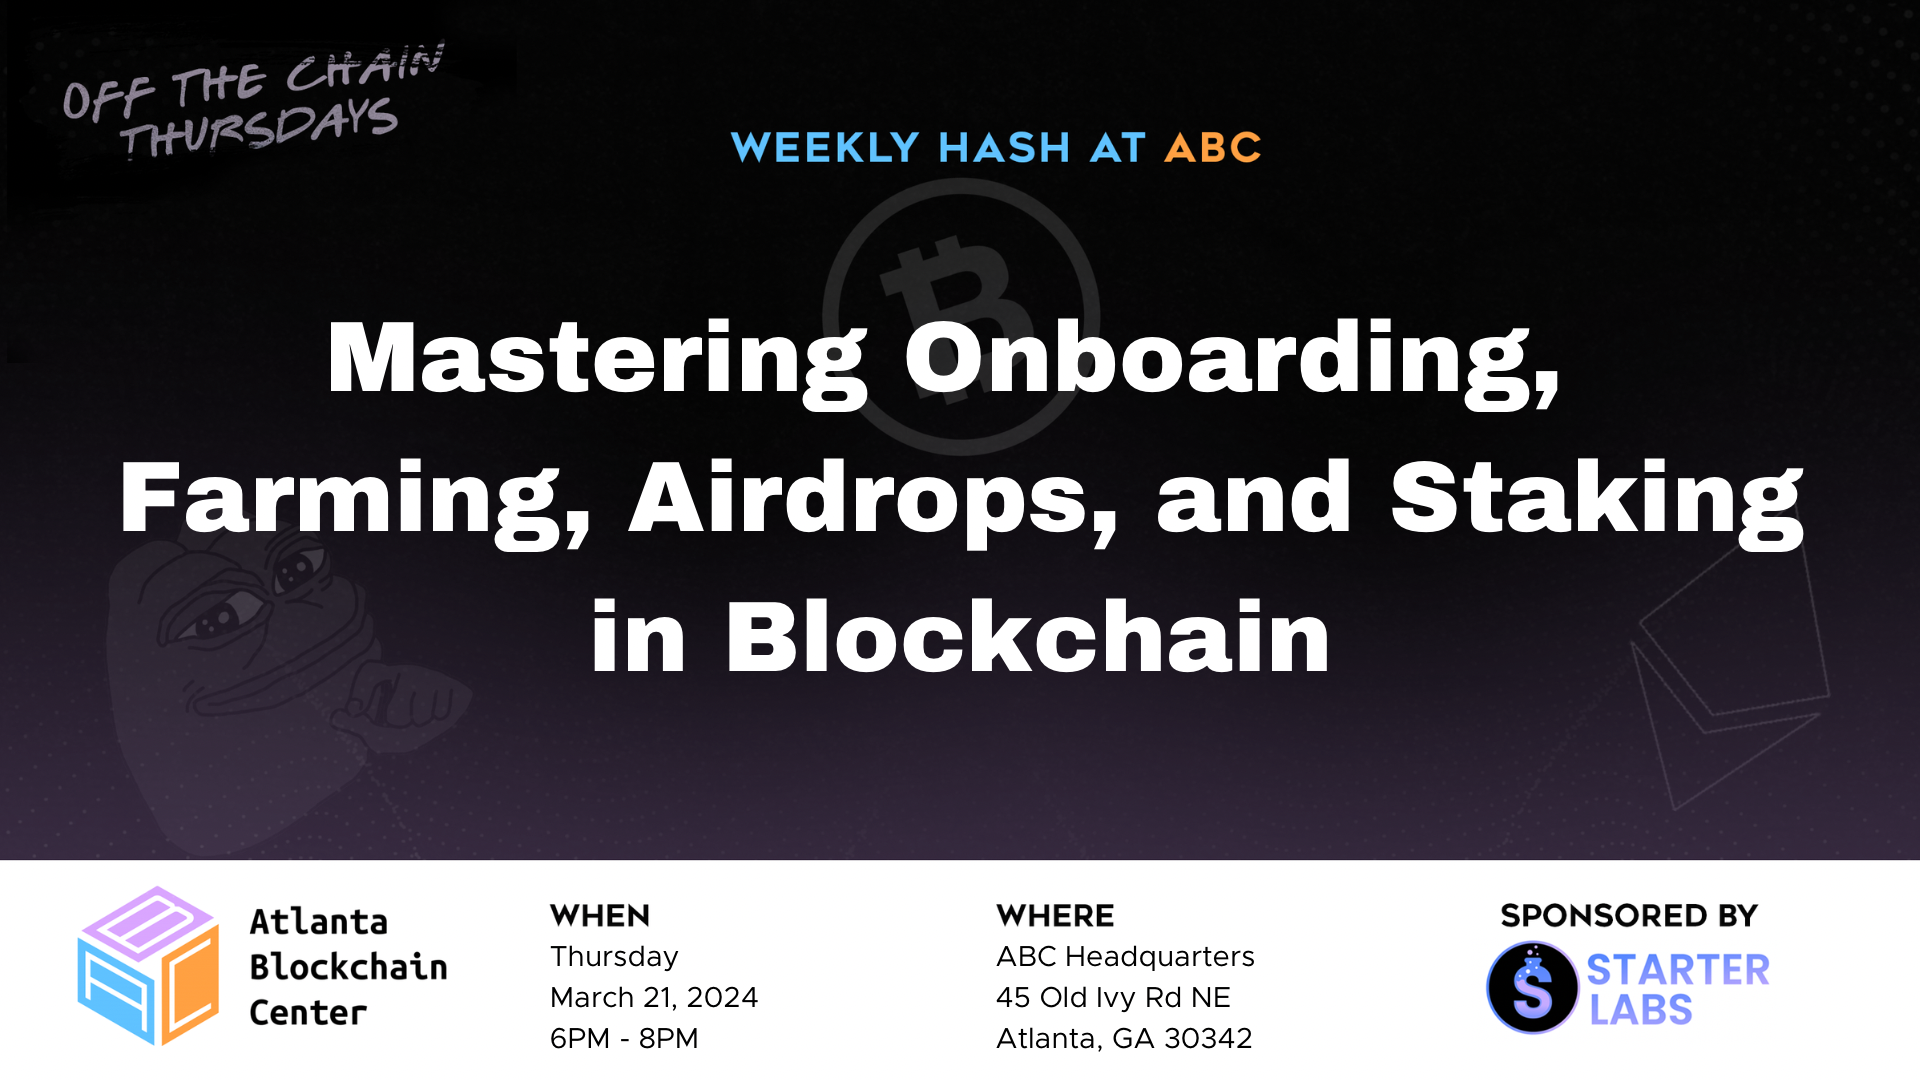 Mastering Onboarding, Farming, Airdrops, and Staking in Blockchain